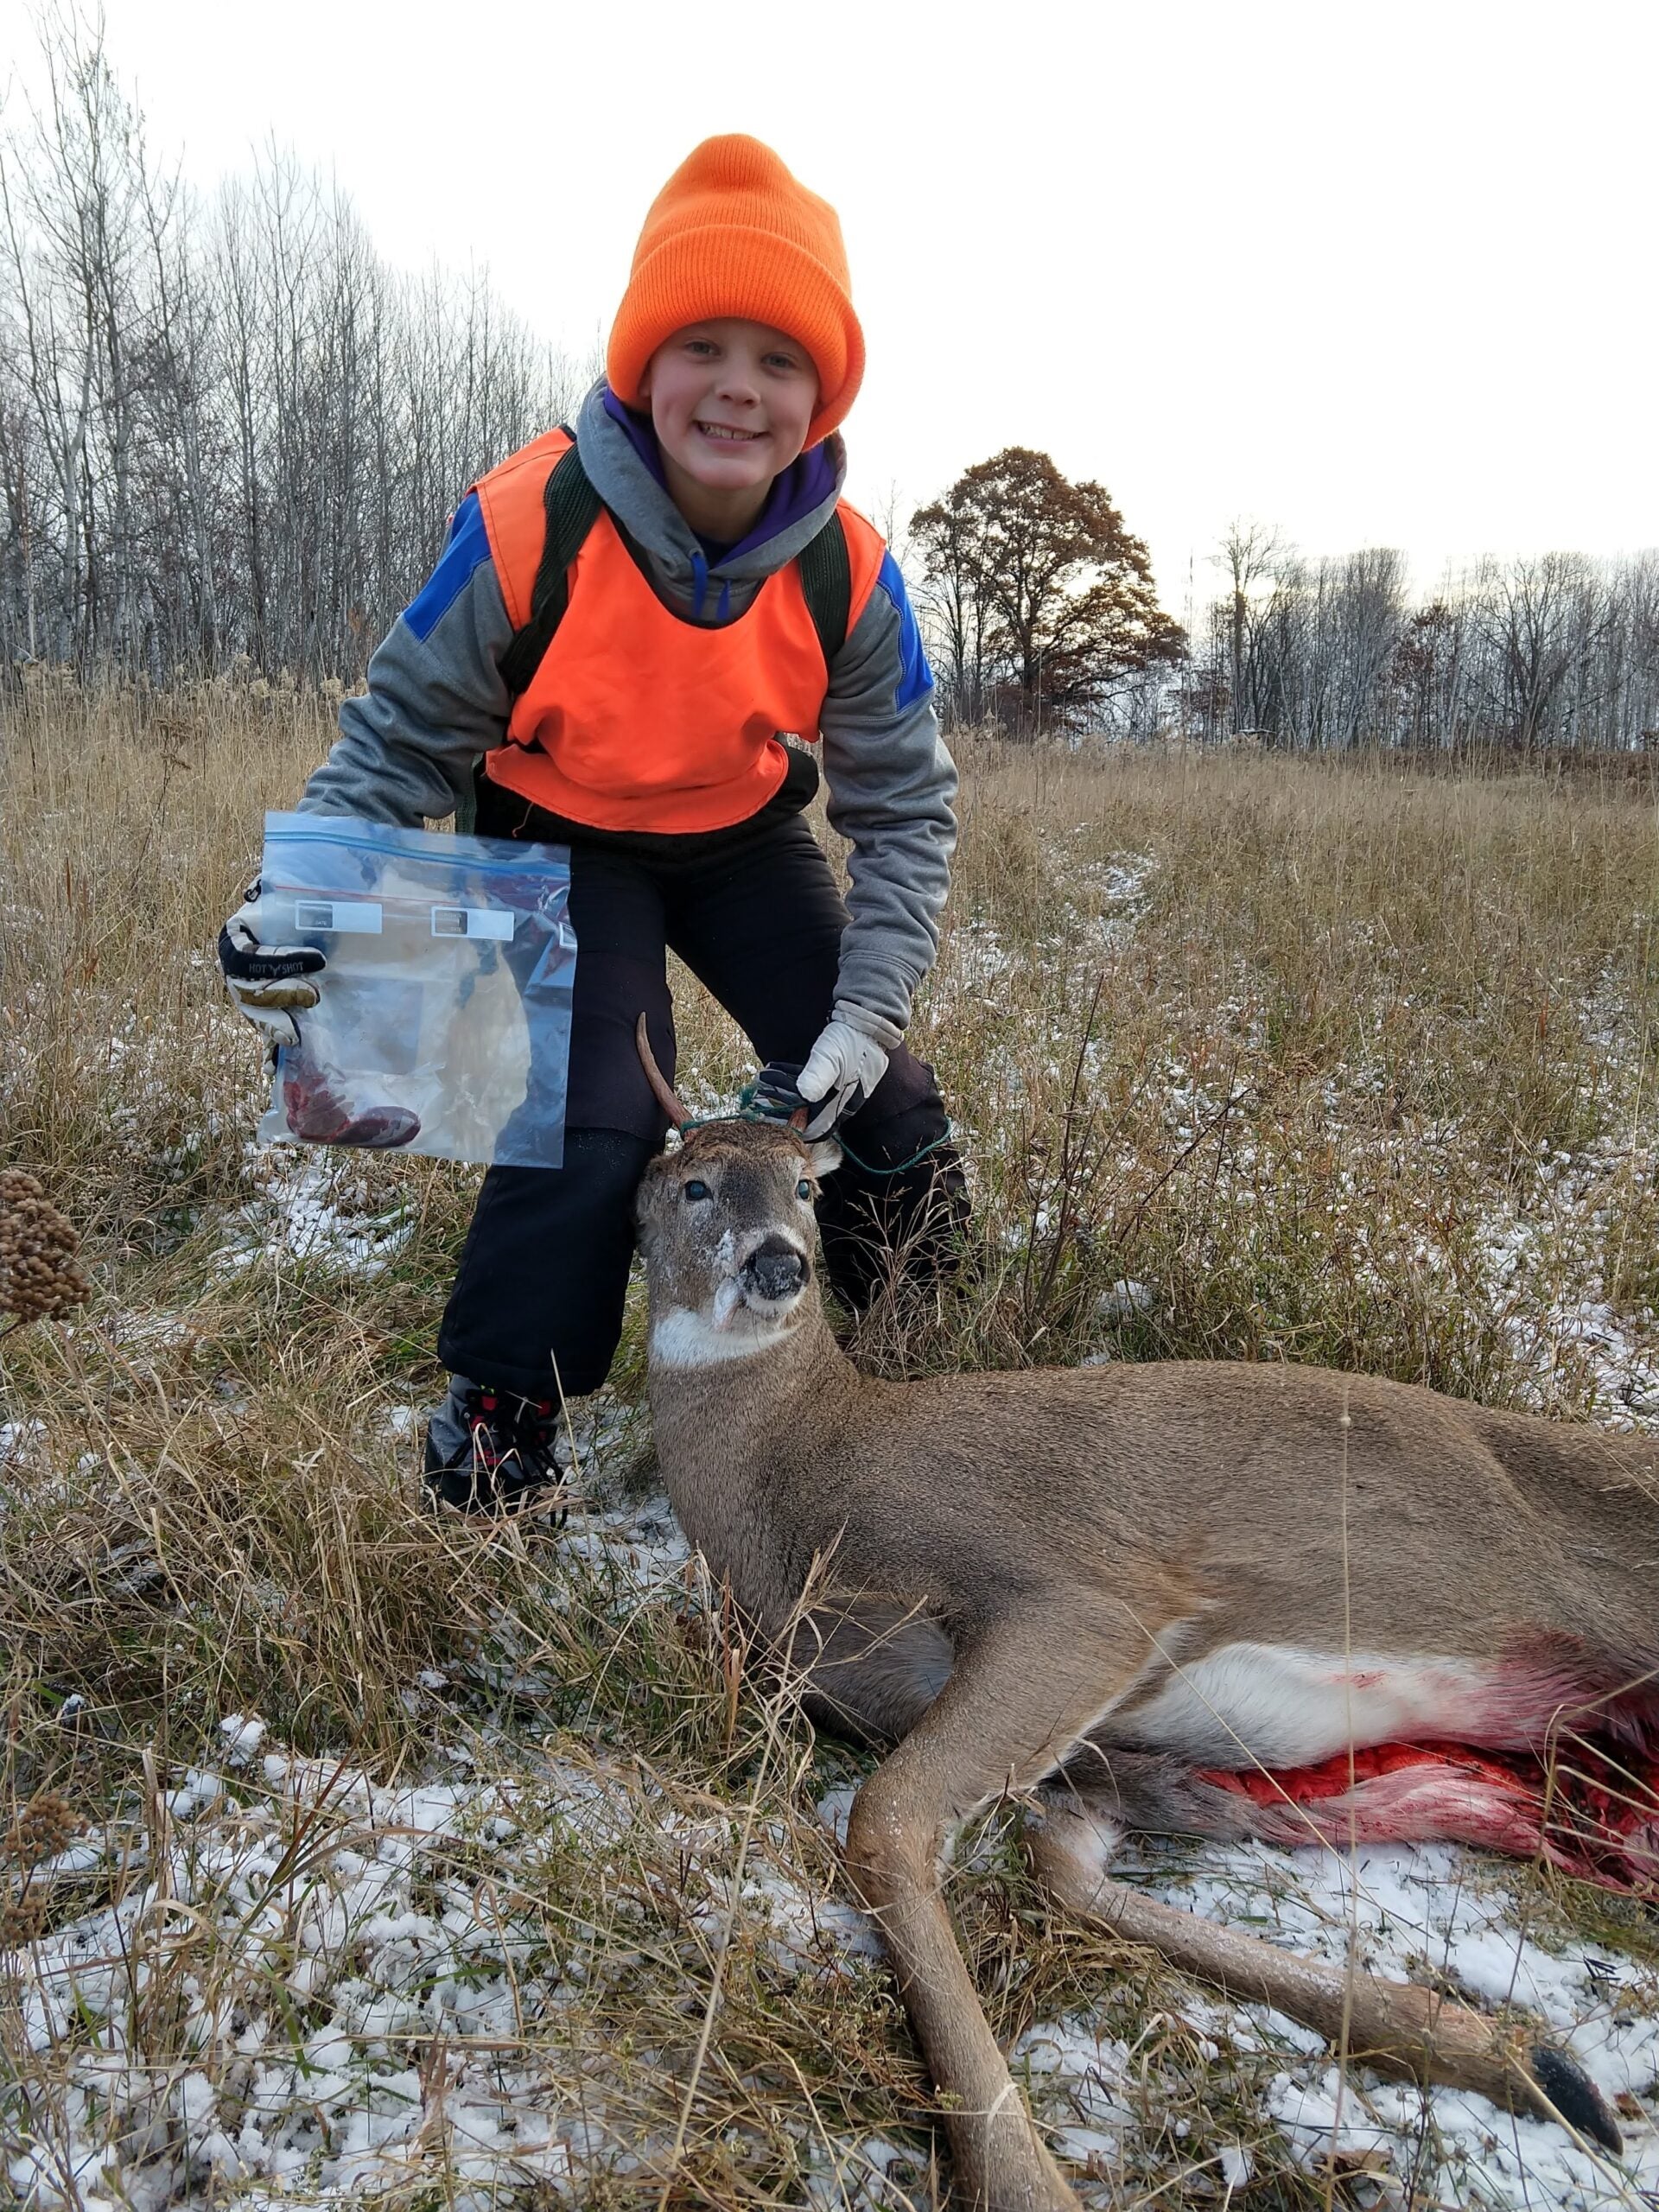 This young hunter submitted his deer spleen to the MDNR for testing after a successful hunt, 